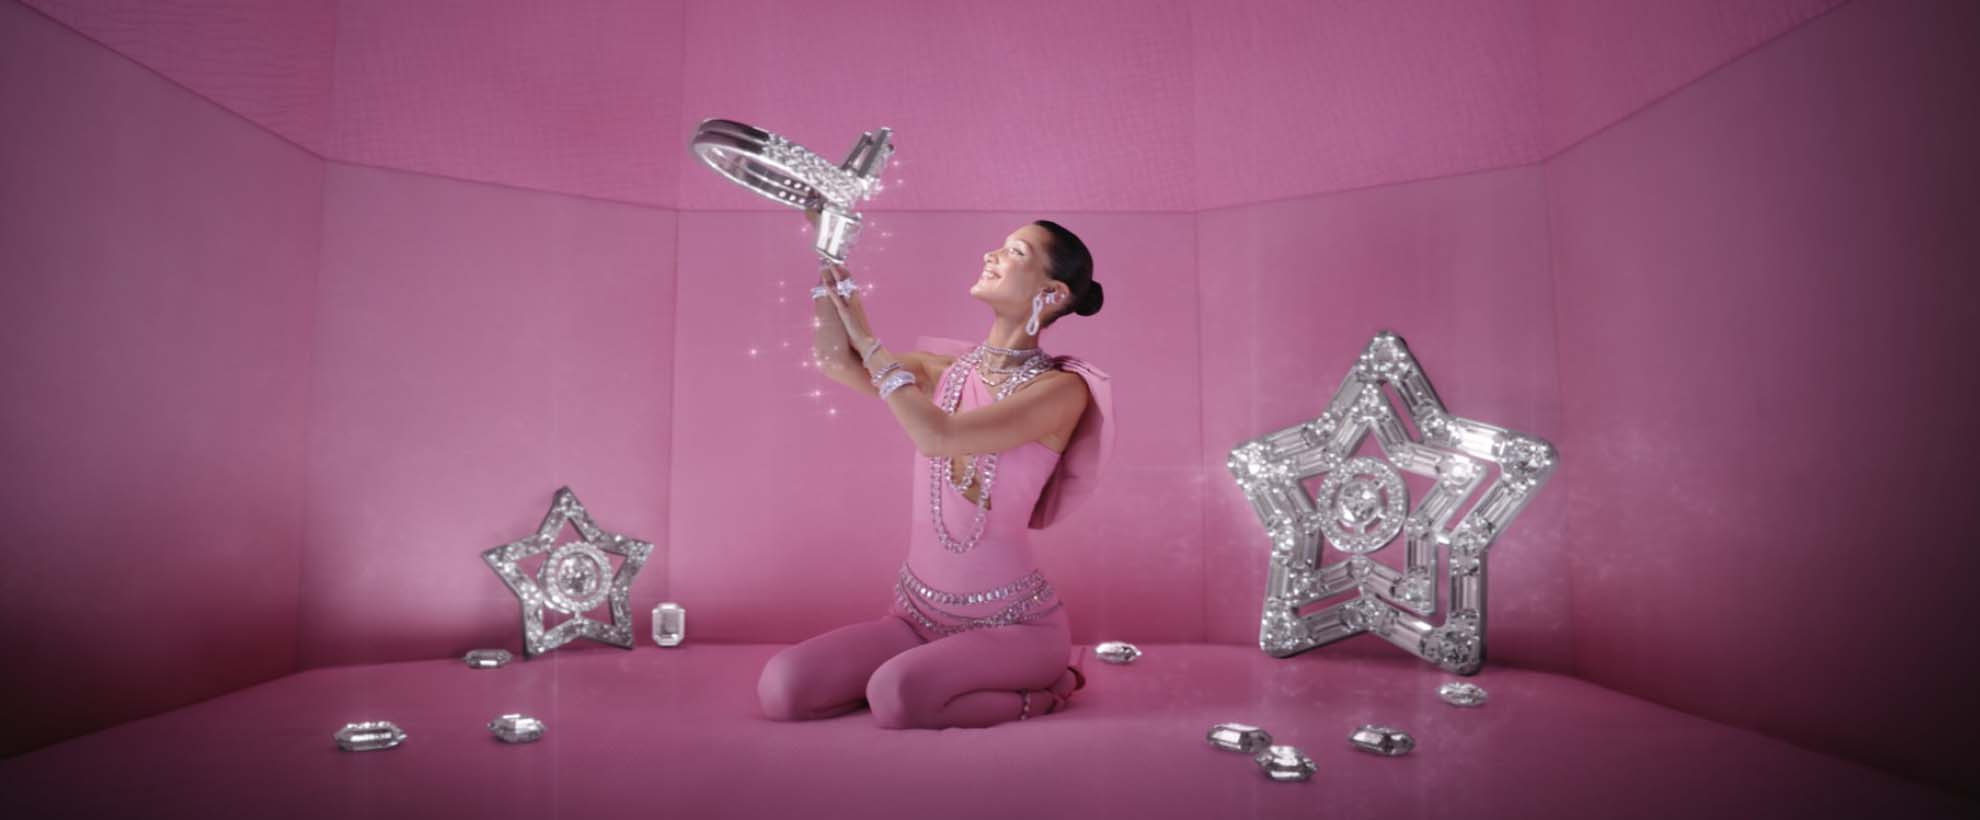 Bella Hadid sits in a pink room surrounded by large crystal stars holidng a large ring